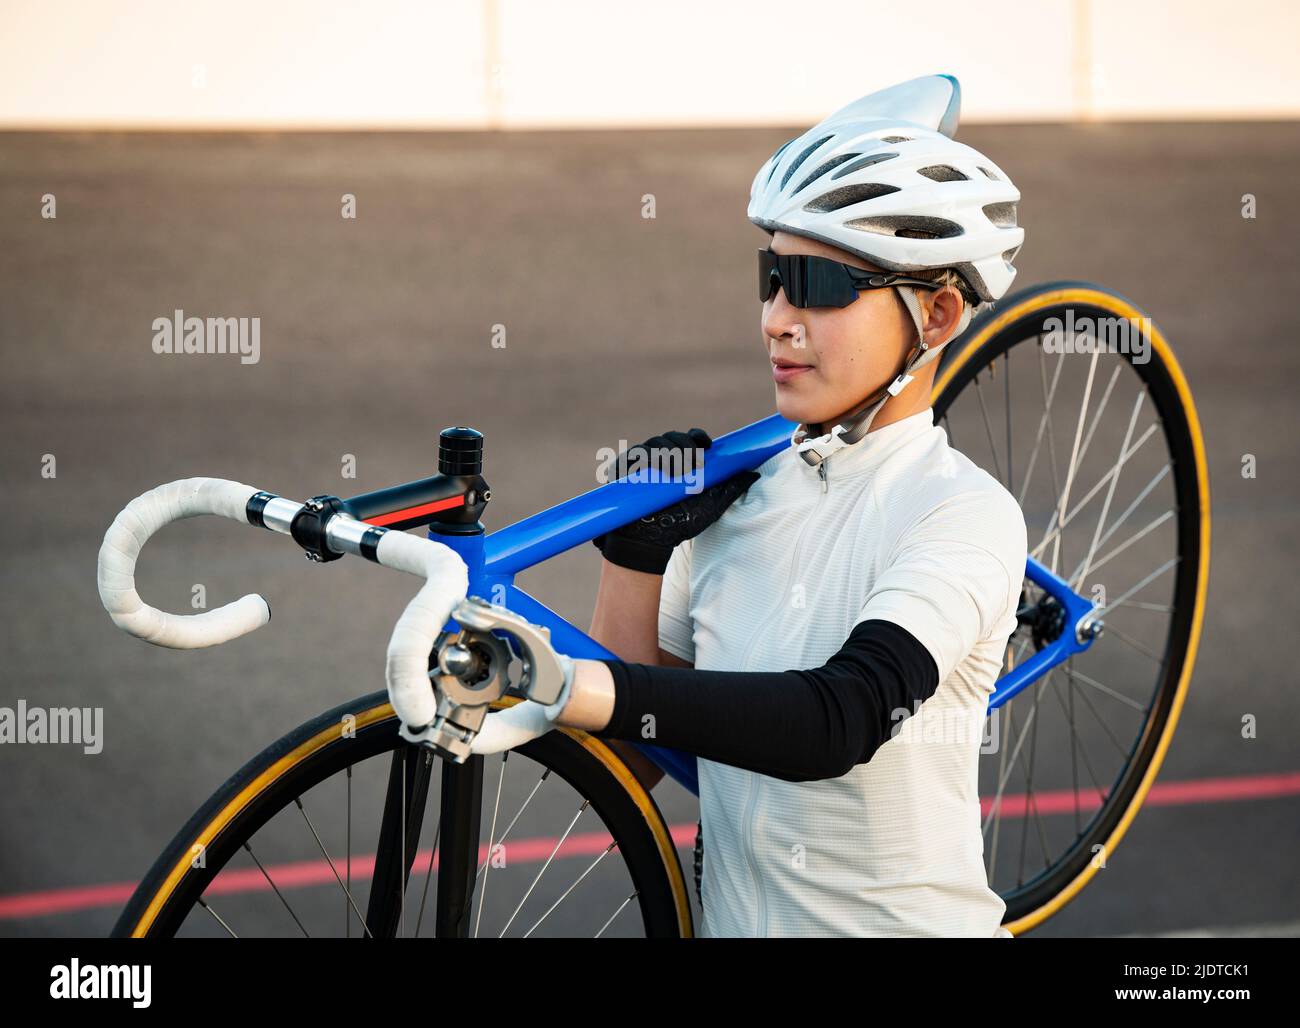 Athletic woman with prosthetic arm carrying bicycle Stock Photo